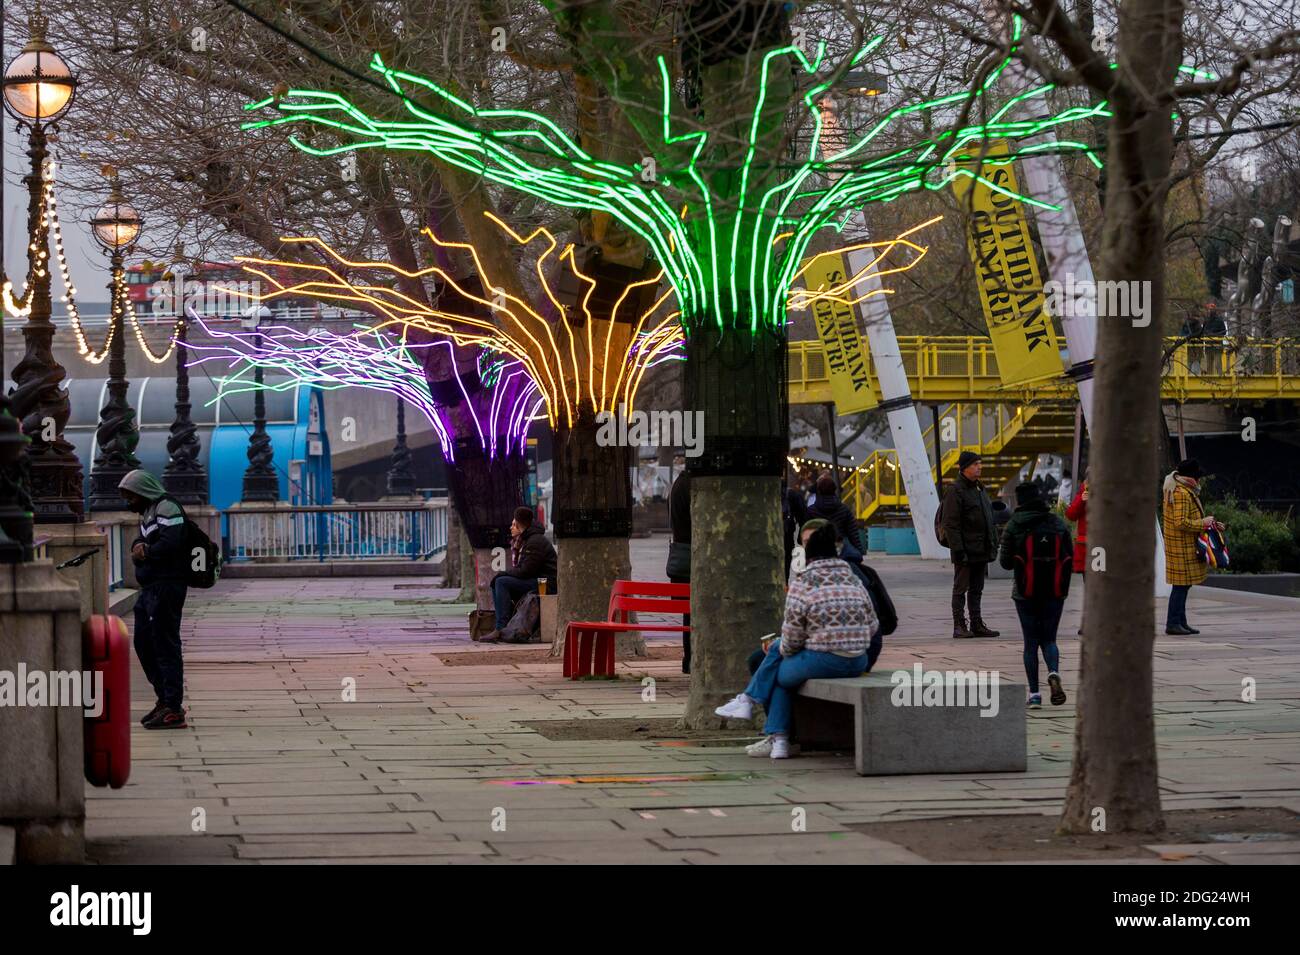 London, UK.  7 December 2020. Members of the public pass by 'Lumen' by David Ogle, trees illuminated with glowing neon flex. Preview of “Winter Light” presented by Southbank Centre.  Over 15 artworks and new illuminated commissions by a range of leading international artists are on display around the site’s buildings and the Riverside Walk until the end of February 2021. Credit: Stephen Chung / Alamy Live News Stock Photo